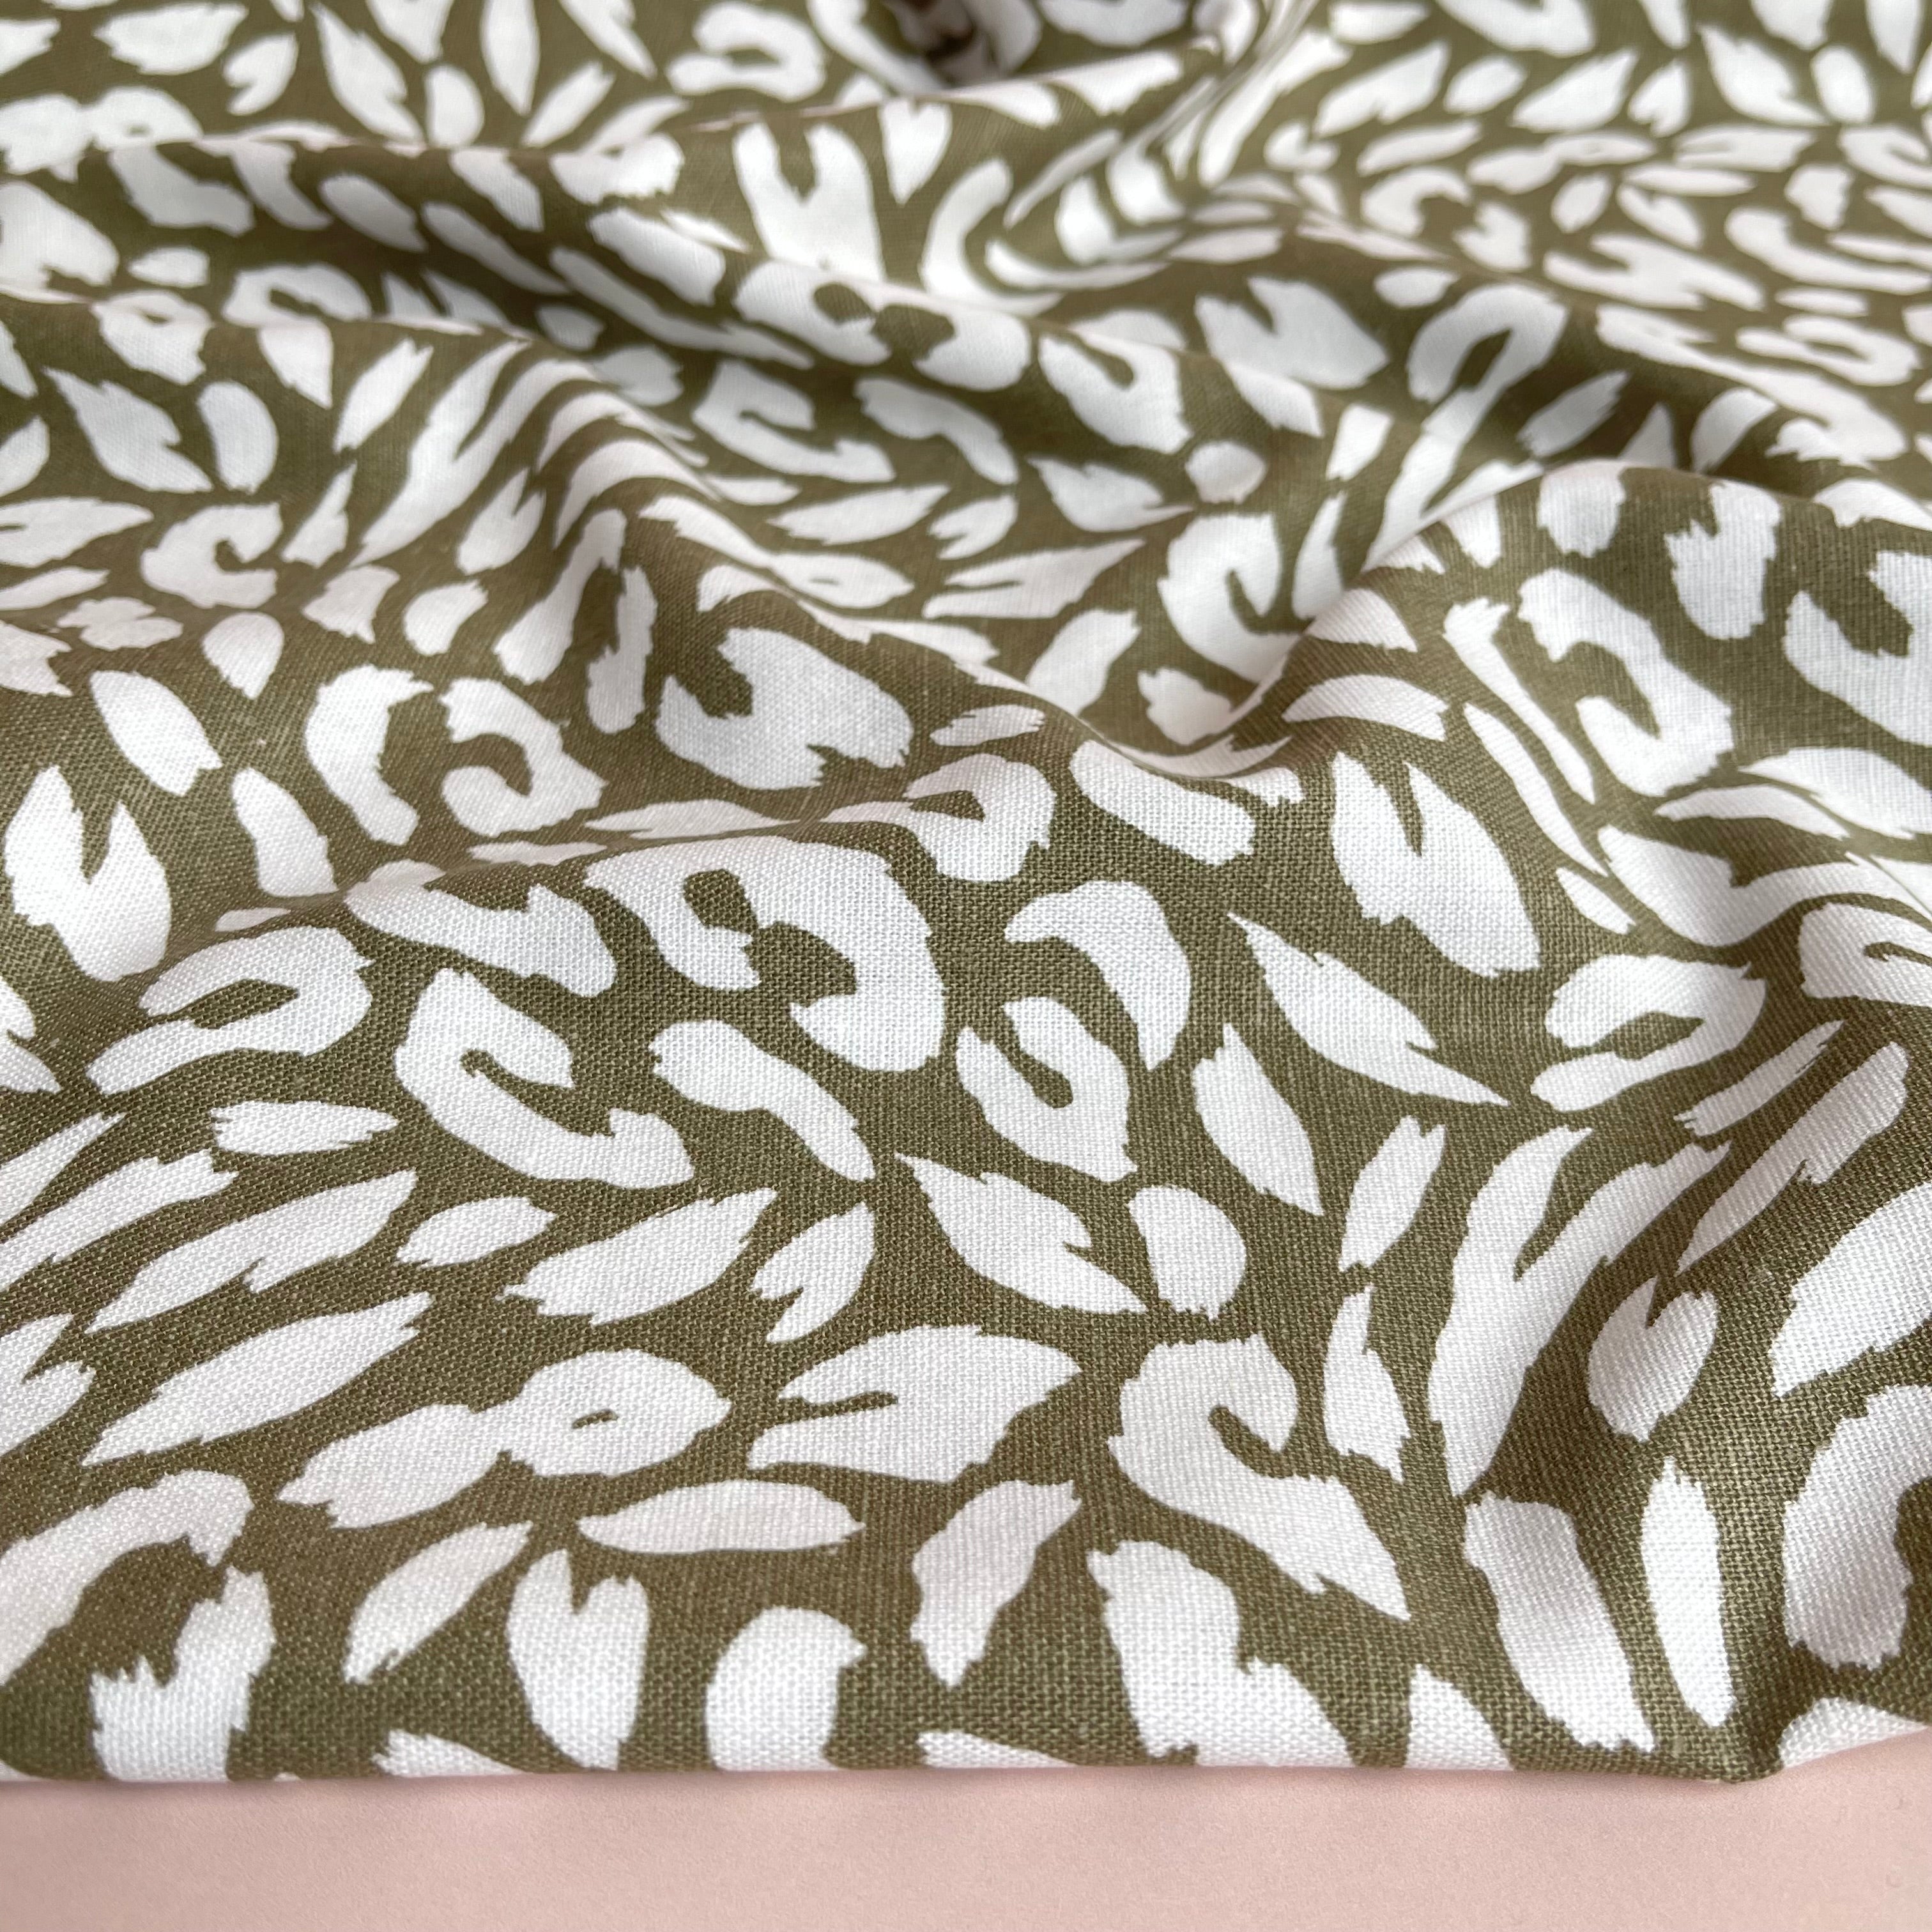 REMNANT 1.65 Metres - Animal Print on Olive Green Linen Viscose Blend Fabric